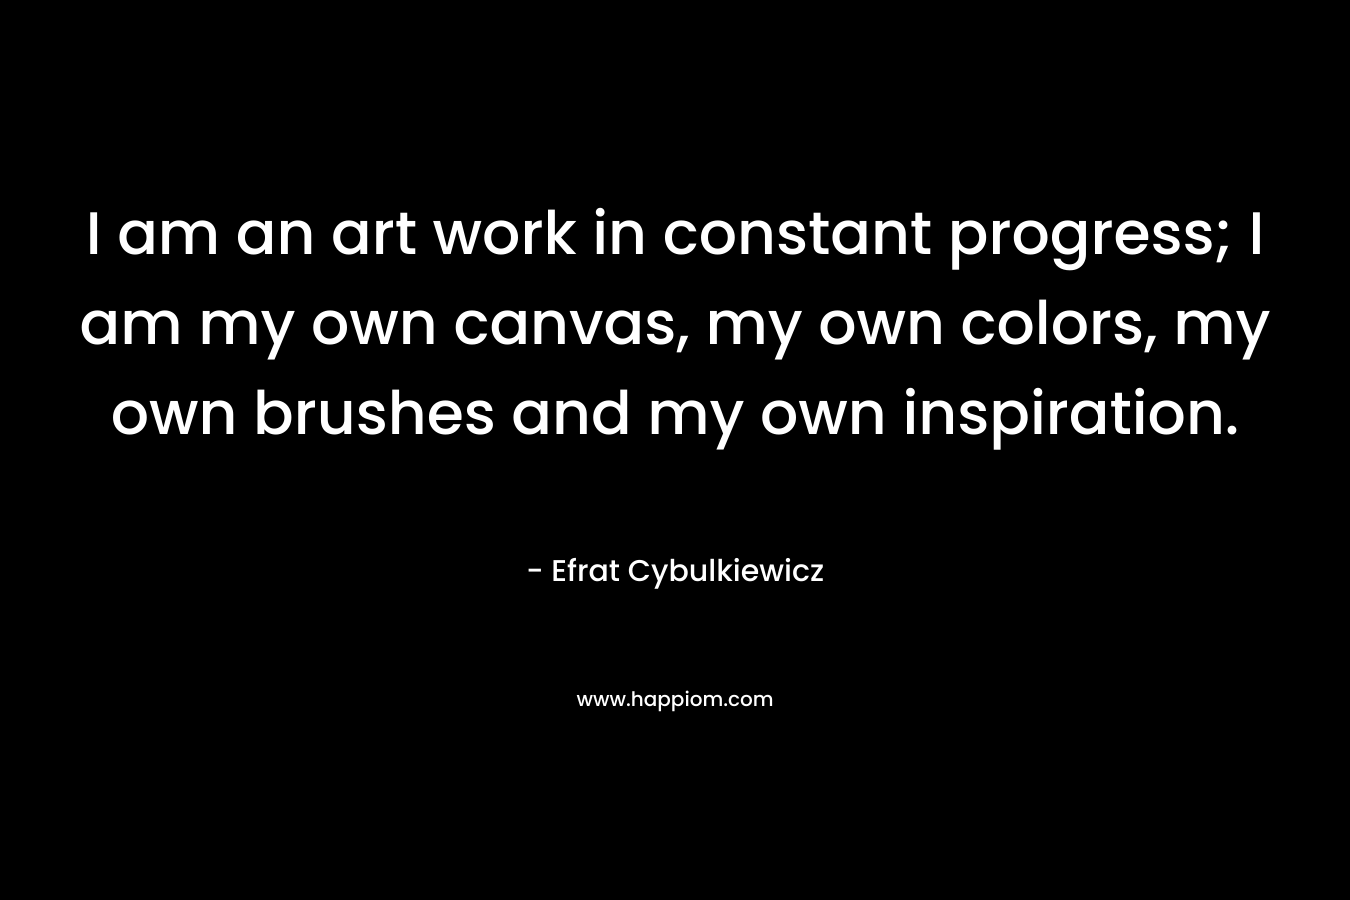 I am an art work in constant progress; I am my own canvas, my own colors, my own brushes and my own inspiration.